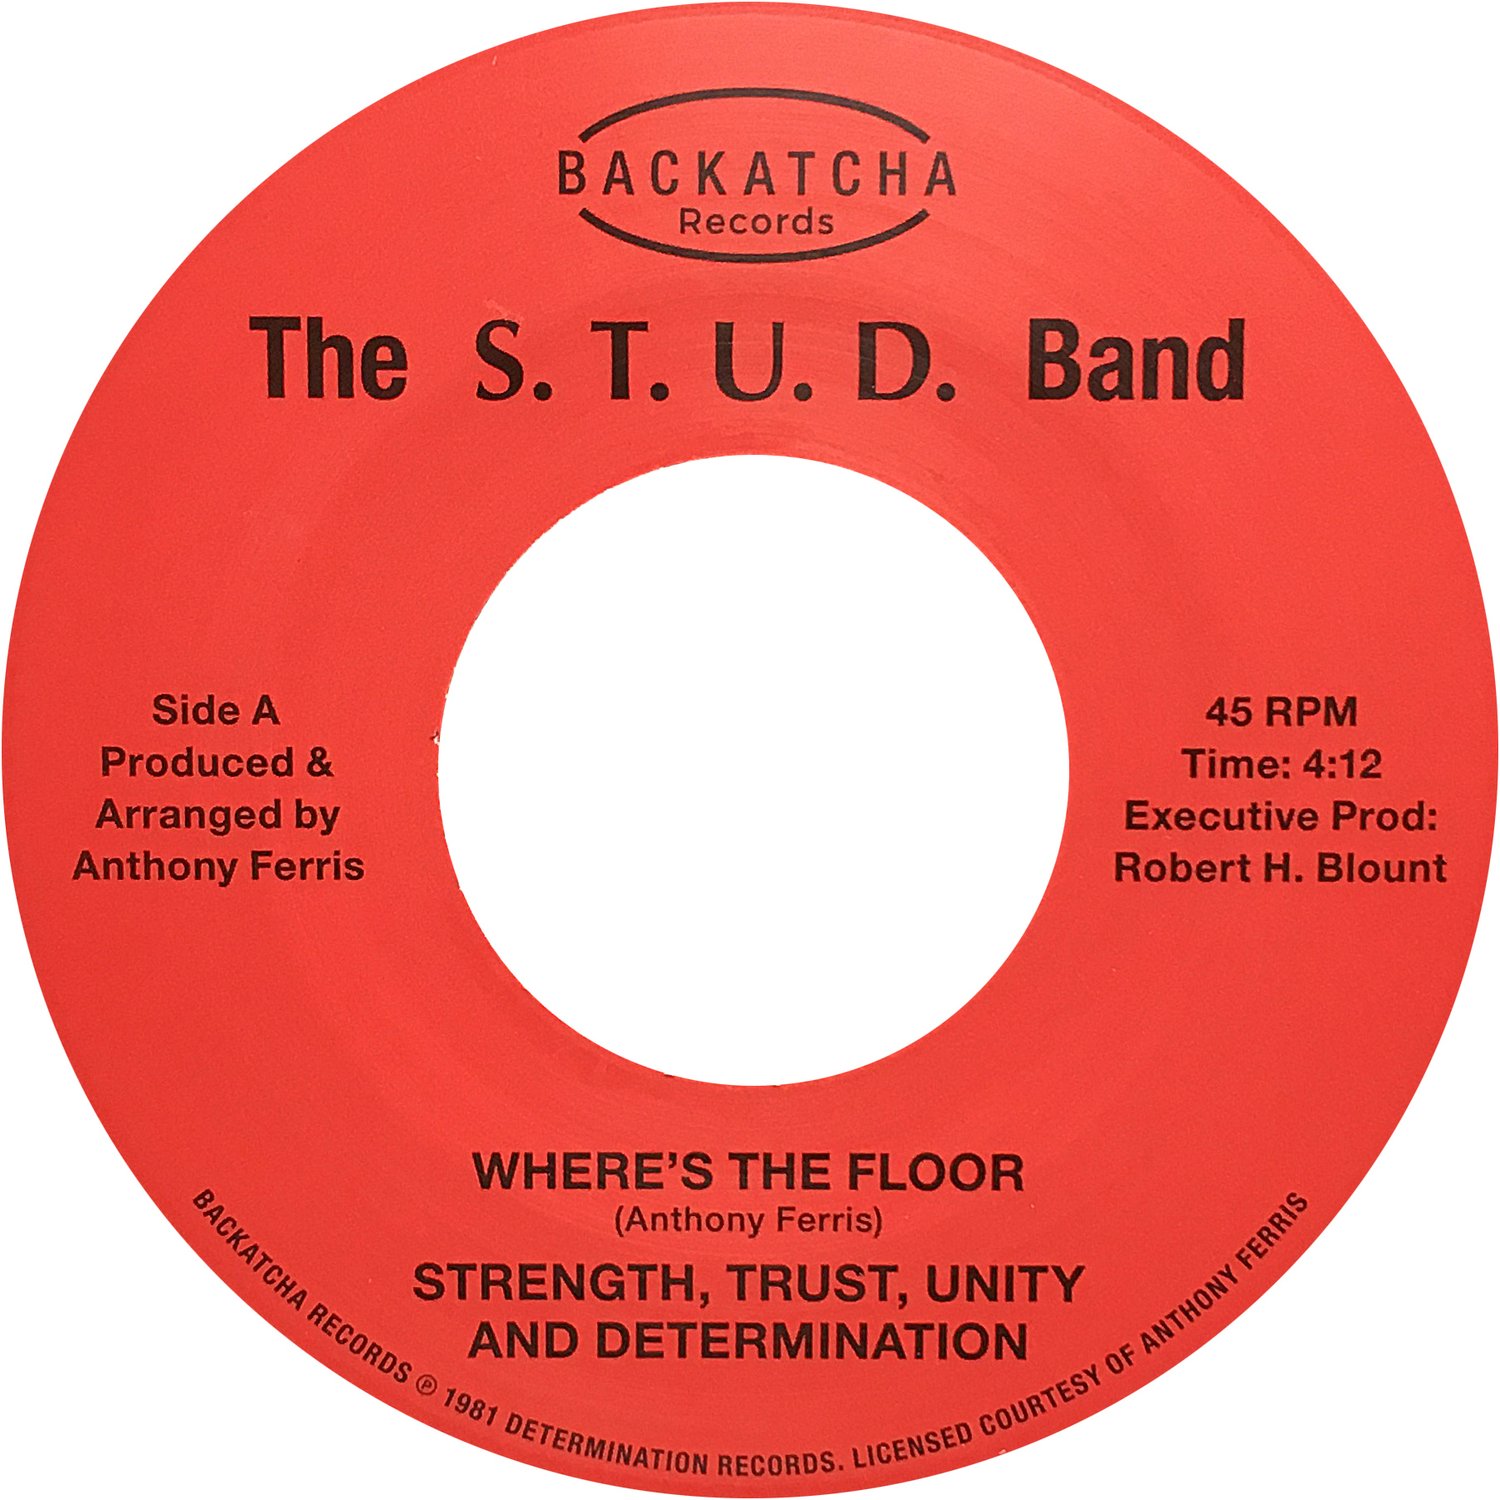 Image of The S.T.U.D. Band 45